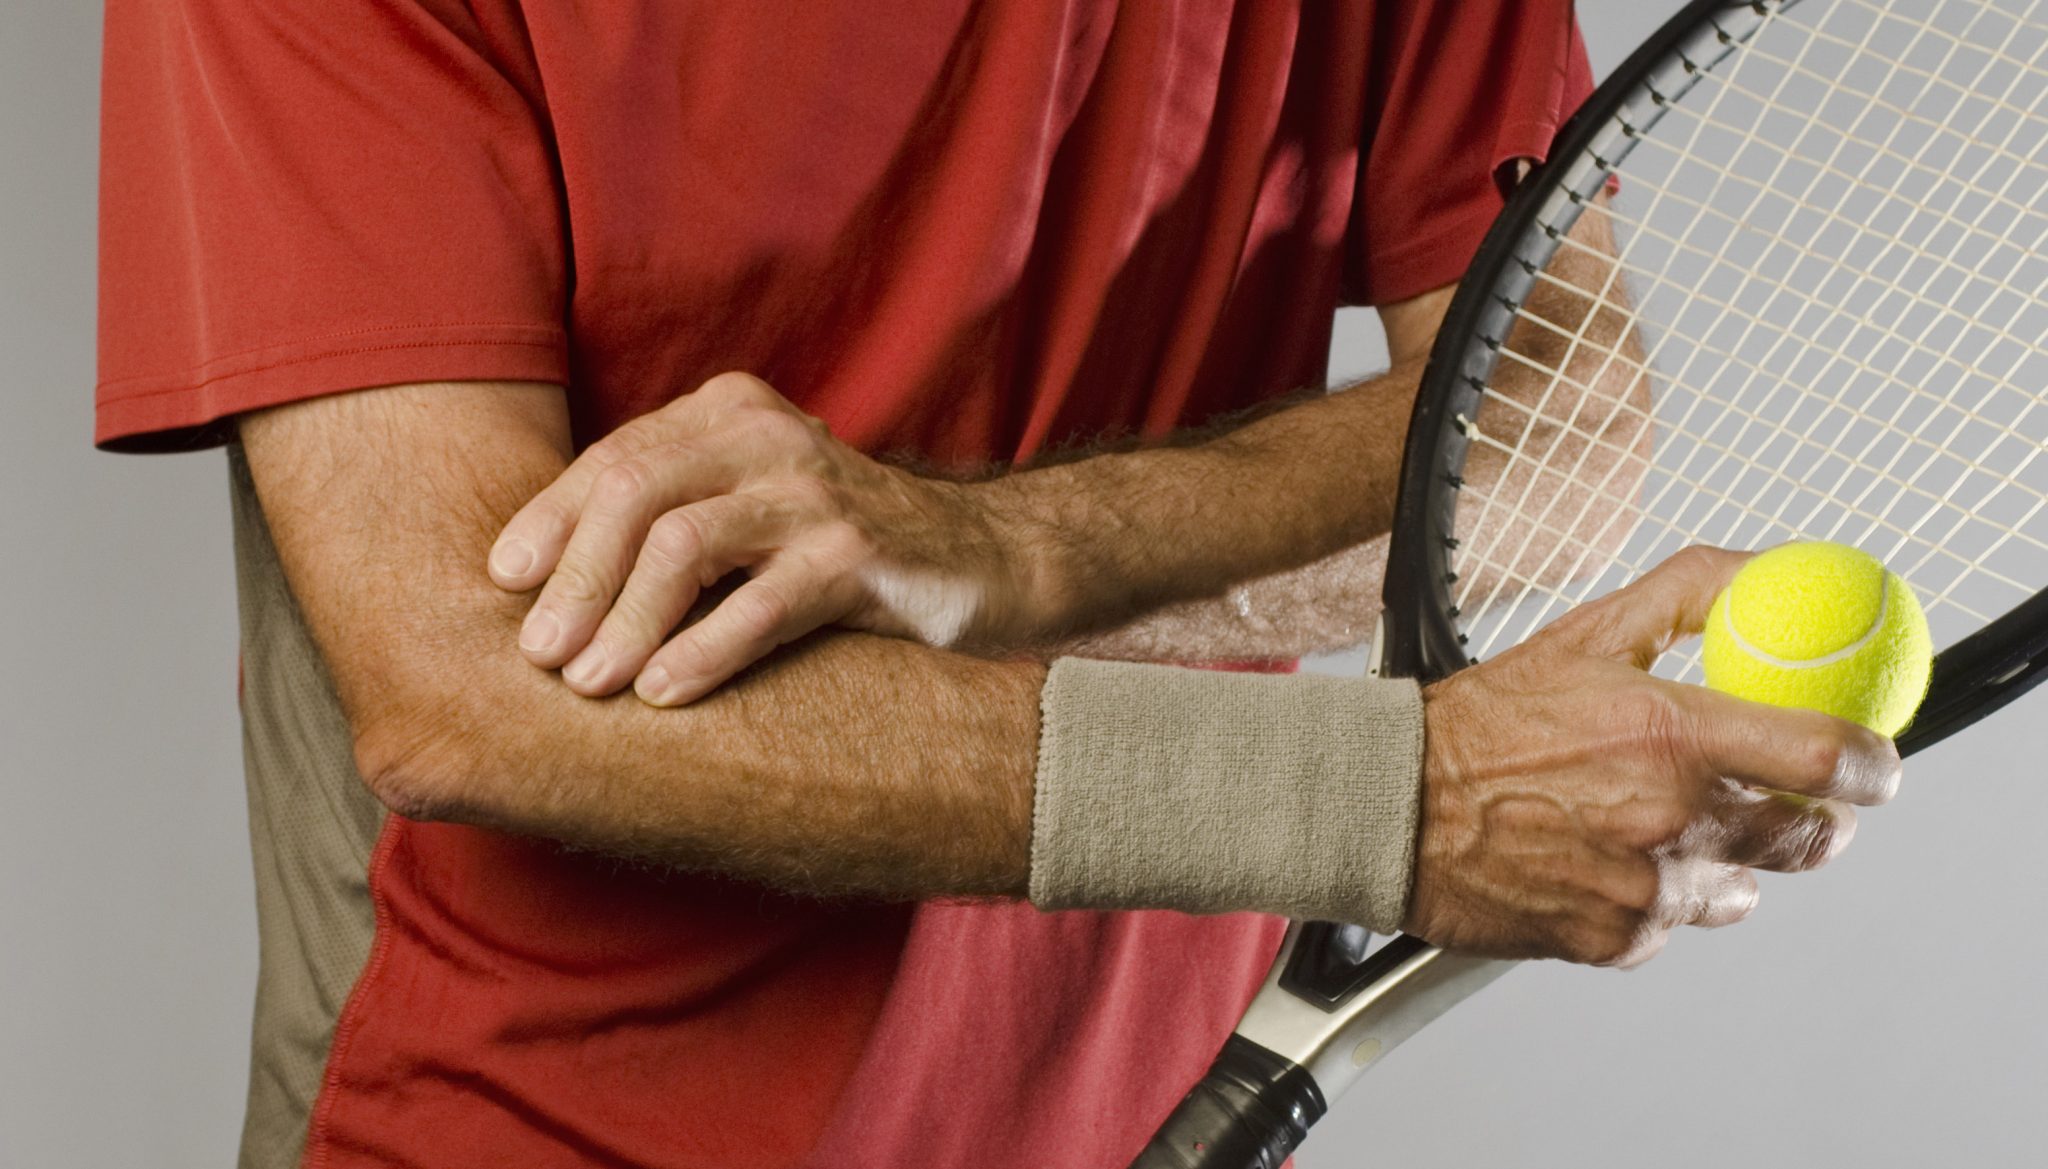 Common Hand and Wrist Water Sports Injuries & How to Prevent Them - Hand  and Wrist Institute